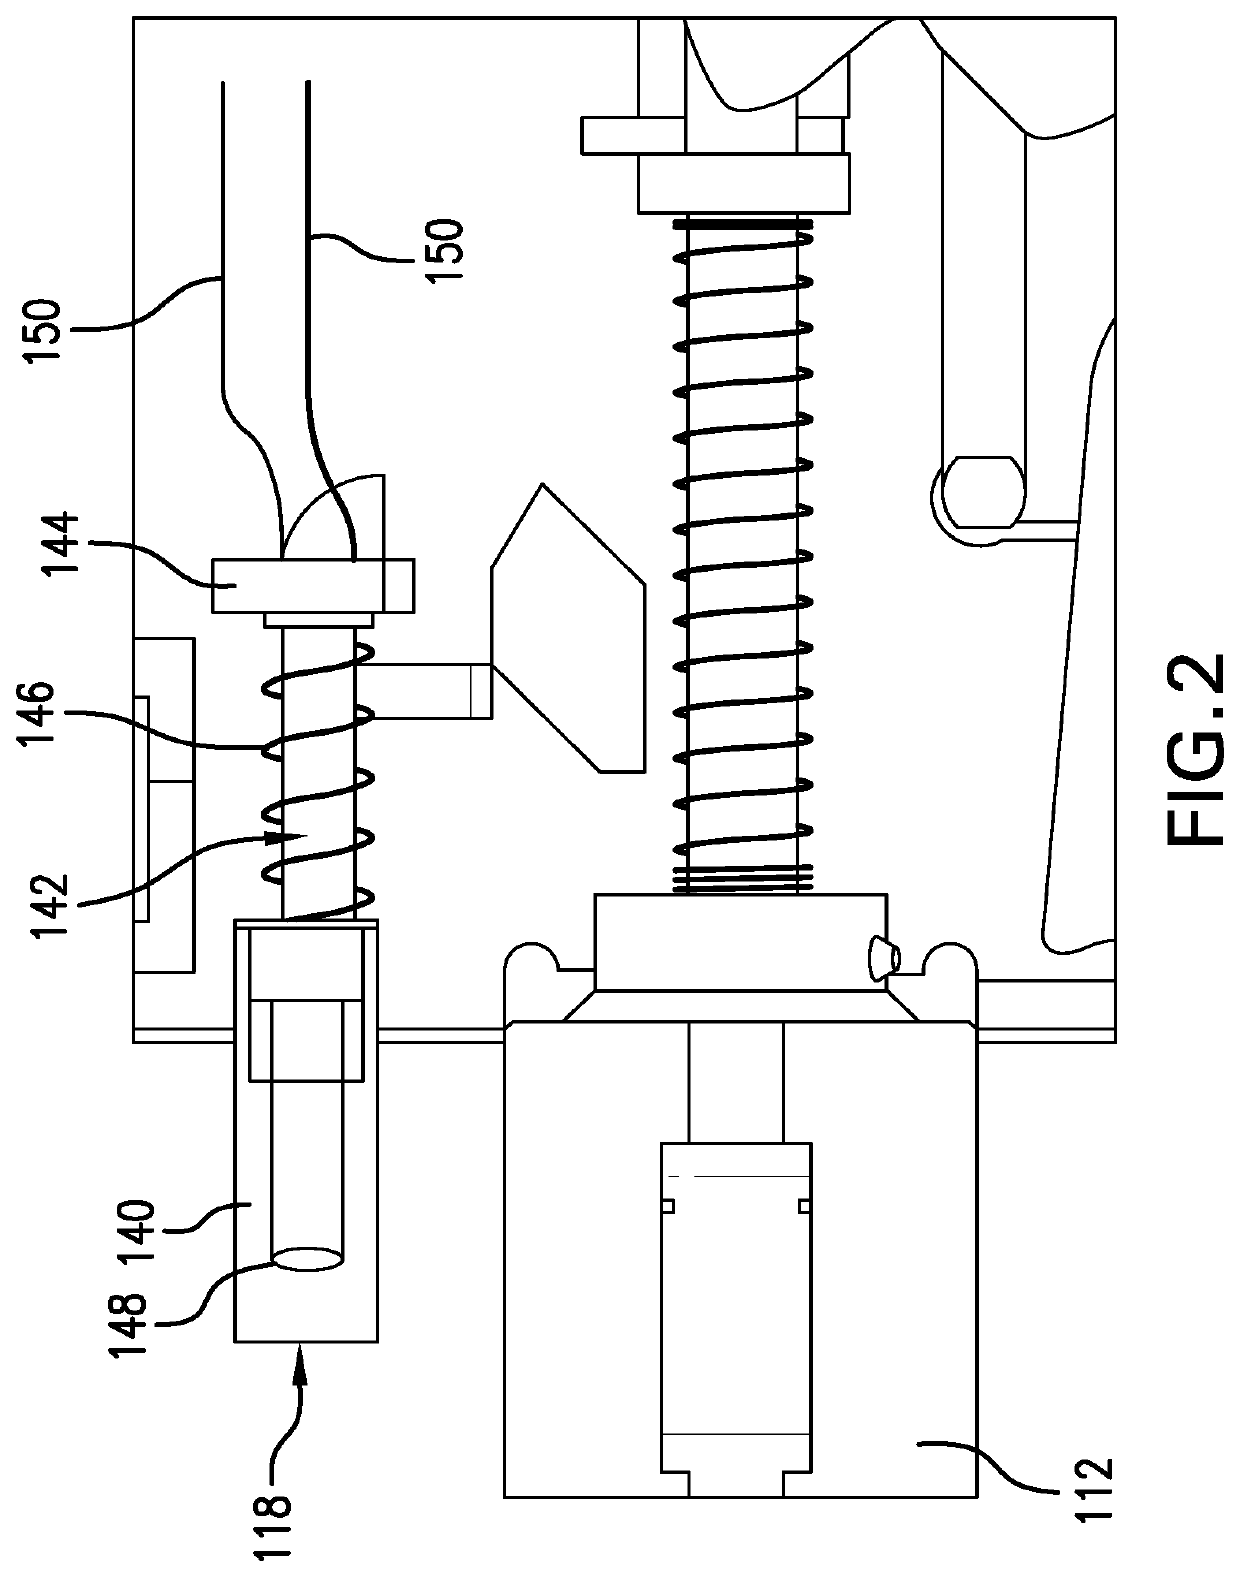 Door position sensor for mortise locks utilizing existing auxiliary or main latch operation